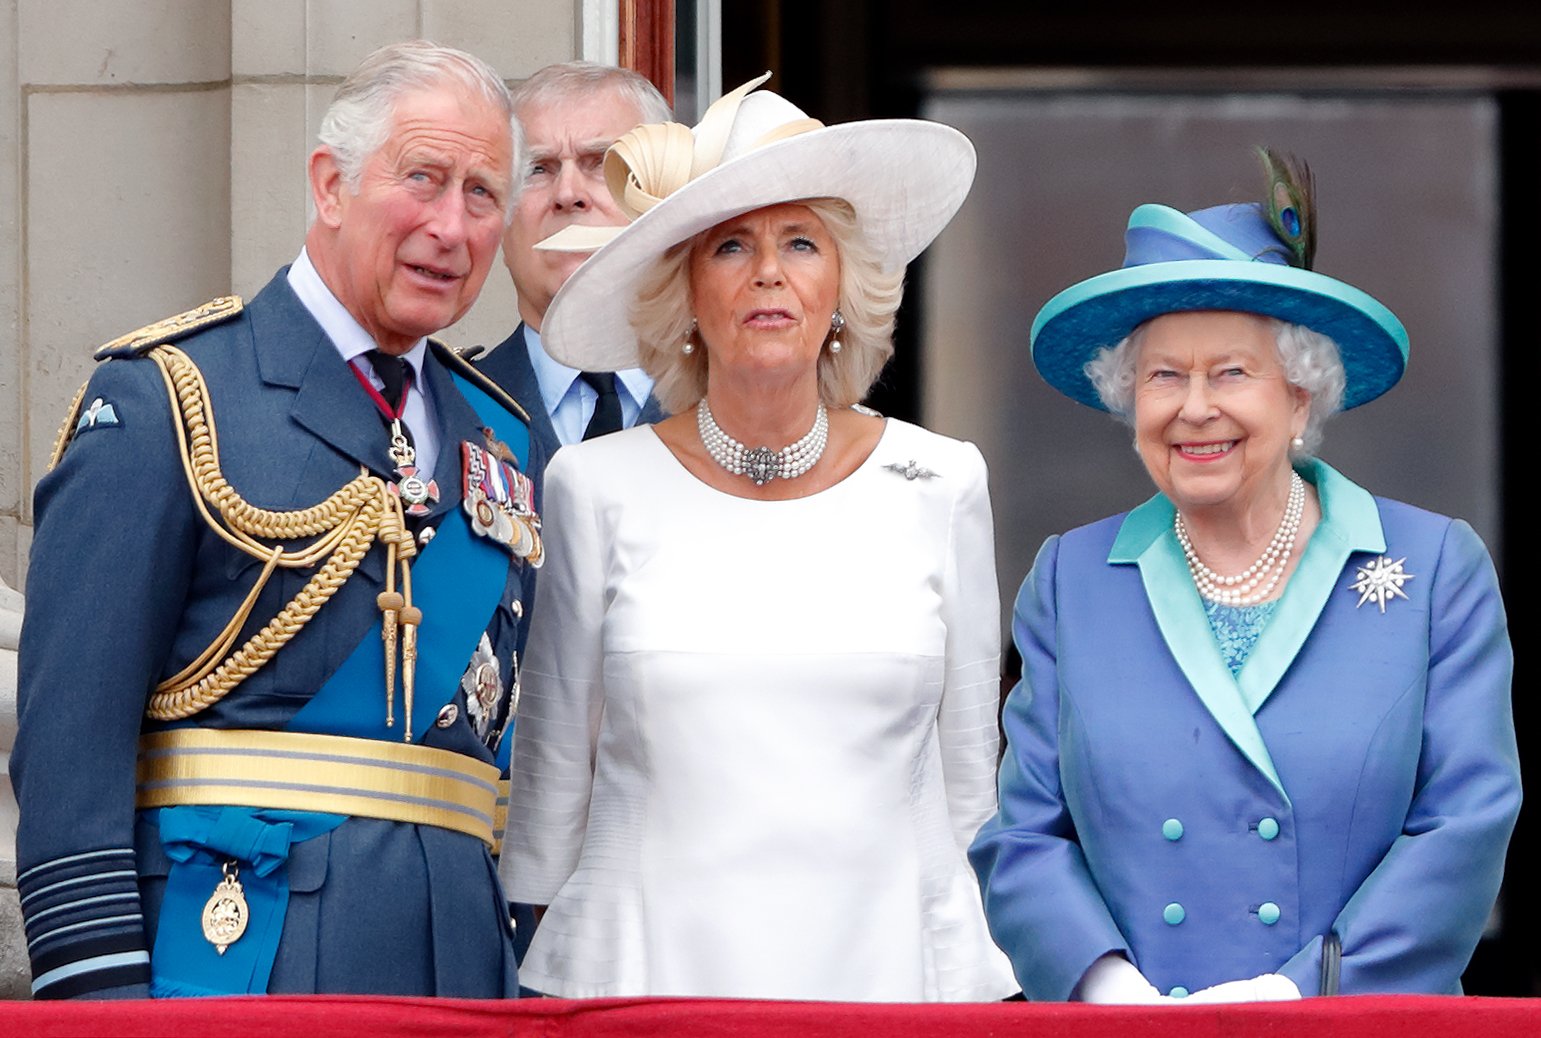 King Charles lll, Queen Consort Camilla Parker-Bowles and Queen Elizabeth II watch a flypast to mark the centenary of the Royal Air Force from the balcony of Buckingham Palace on July 10, 2018 in London, England. | Source: Getty Images